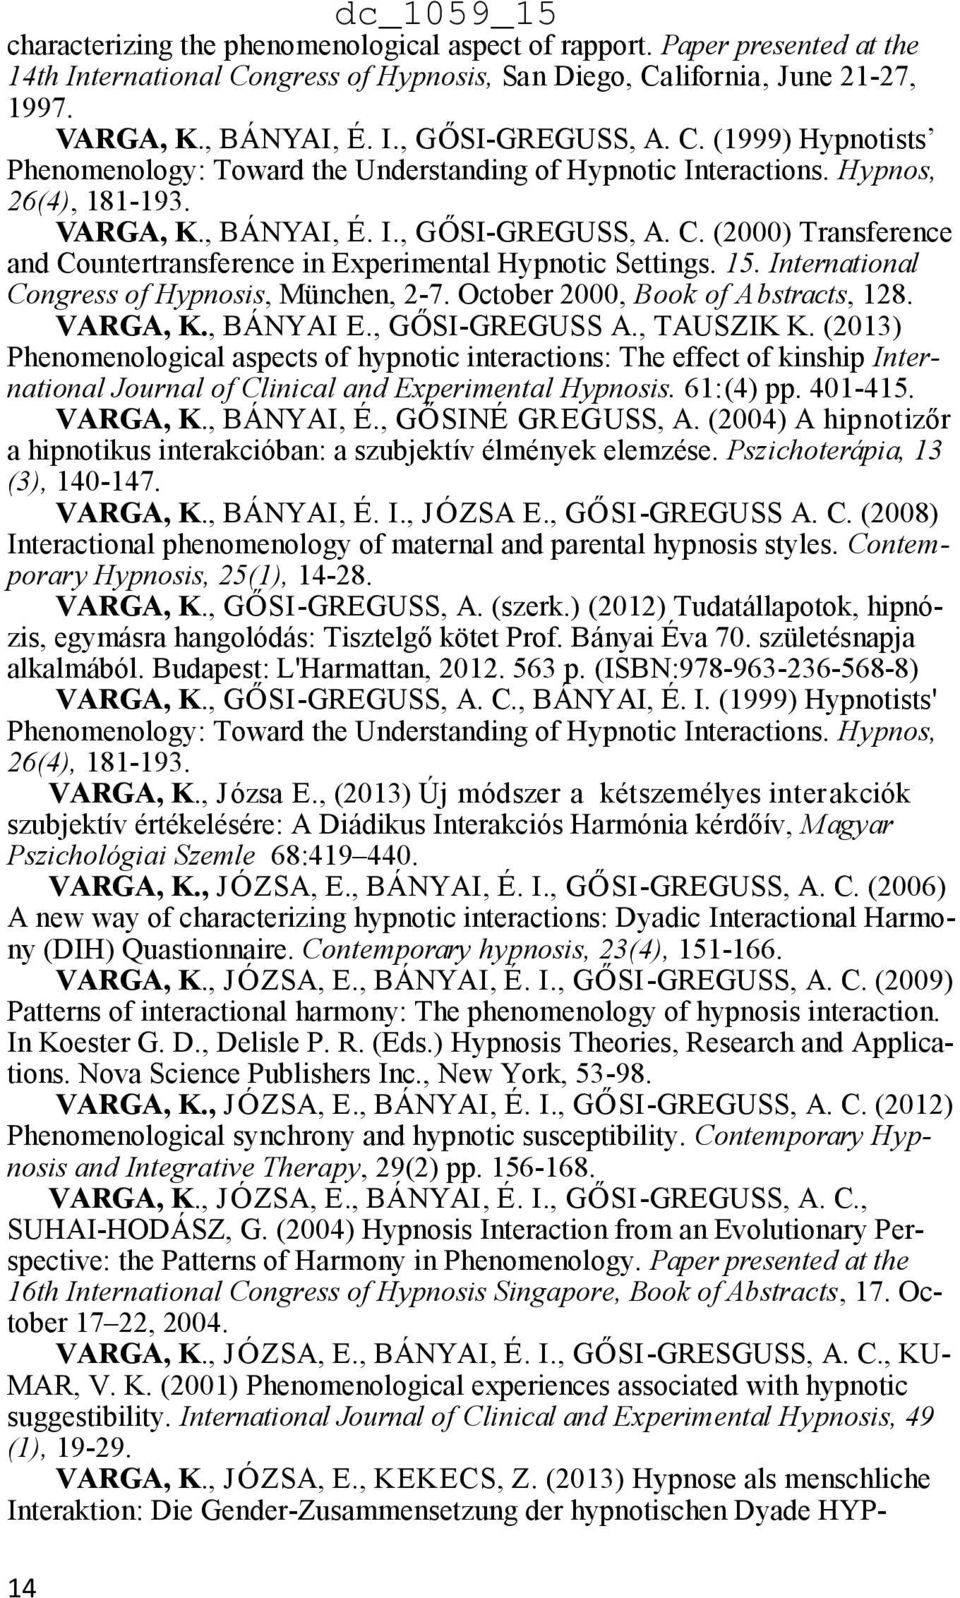 (2000) Transference and Countertransference in Experimental Hypnotic Settings. 15. International Congress of Hypnosis, München, 2-7. October 2000, Book of Abstracts, 128. VARGA, K., BÁNYAI E.